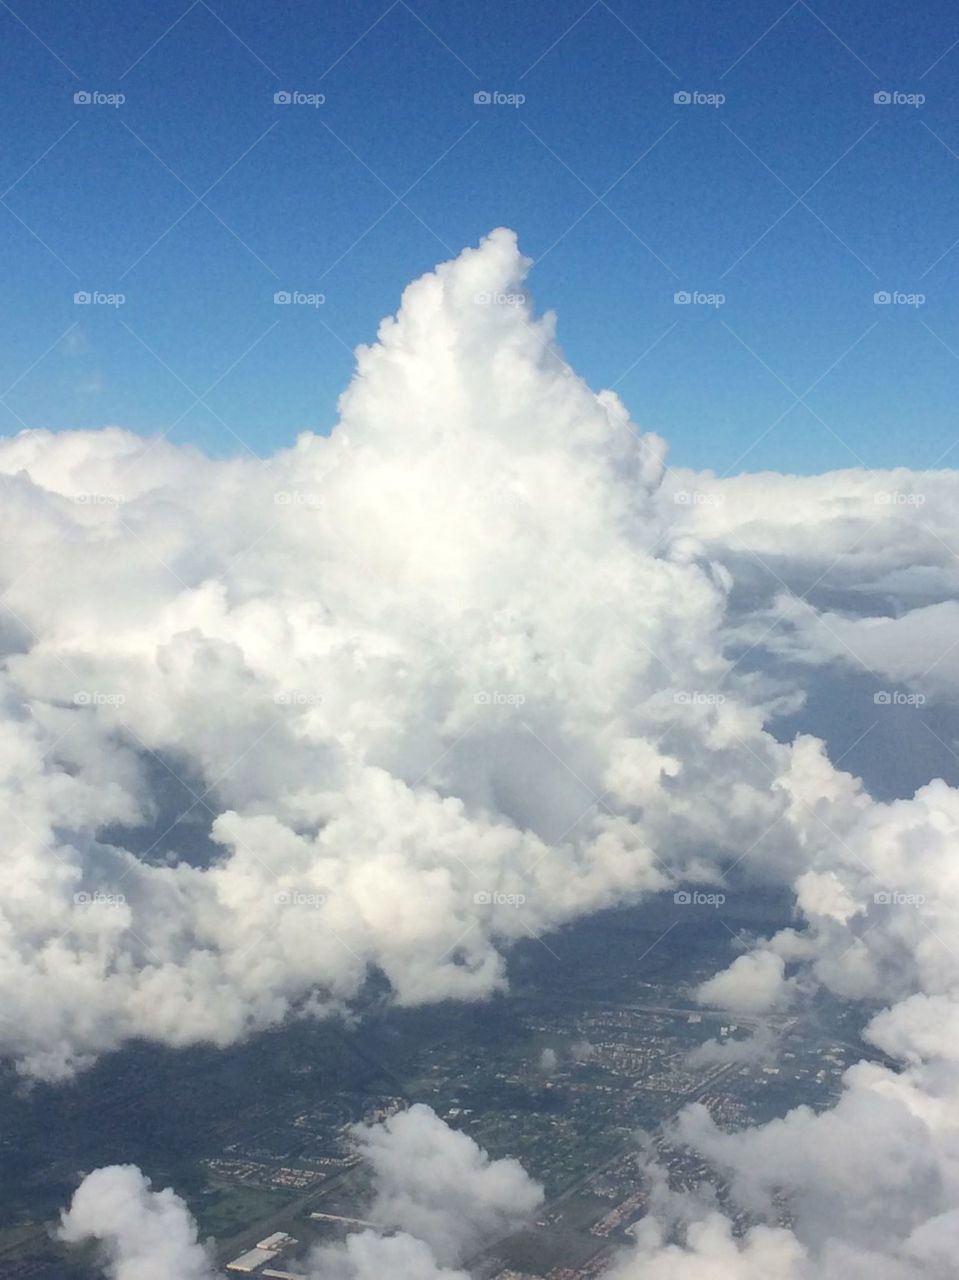 Cloud formation 2. Loud formation over Miami on takeoff